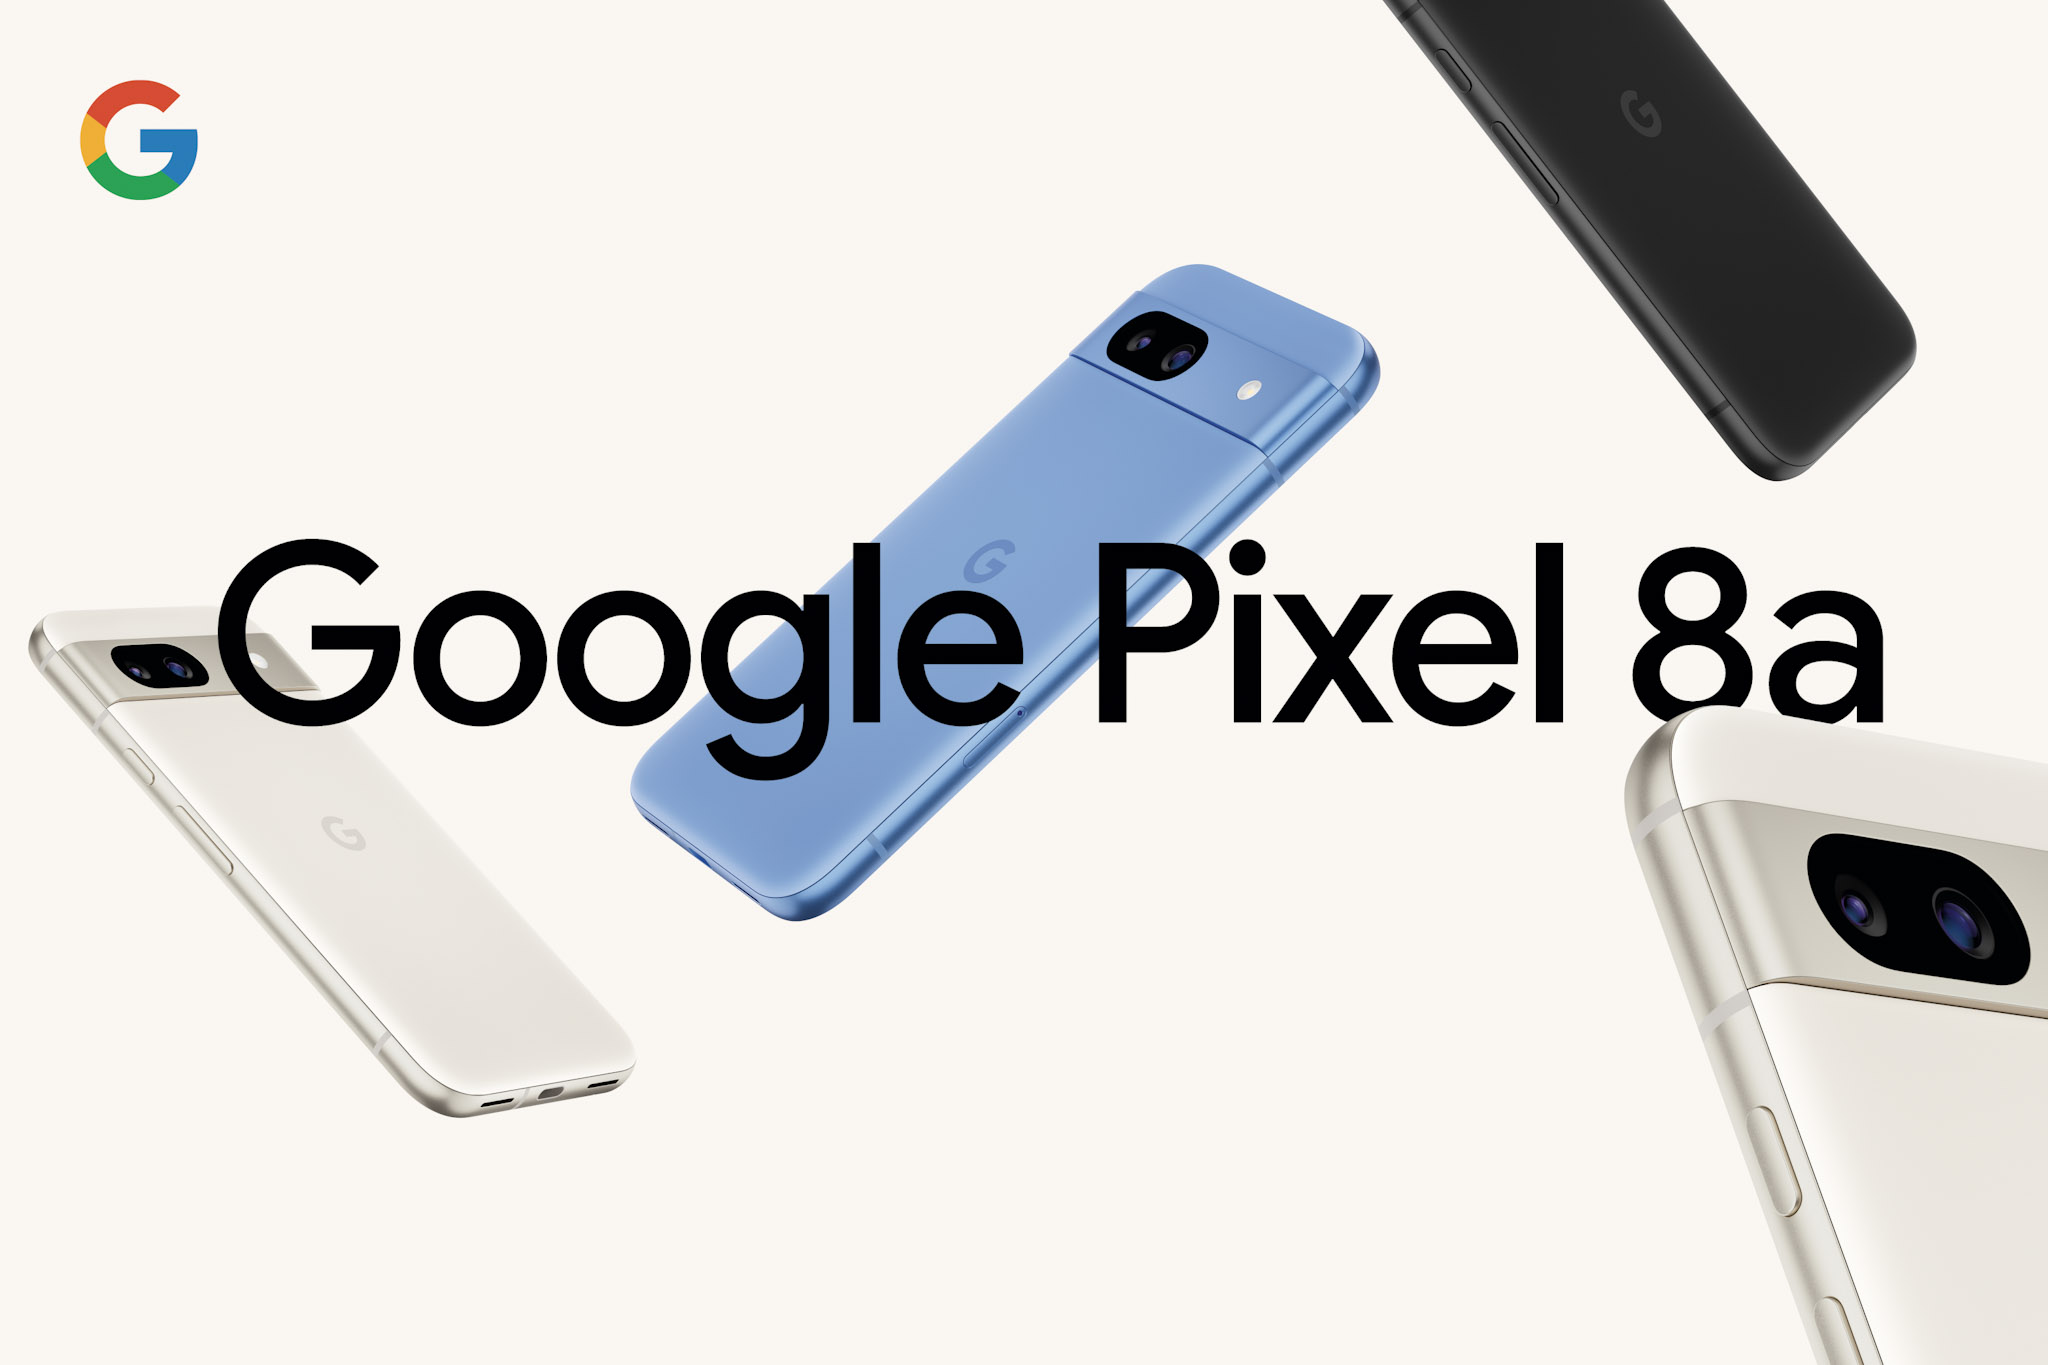 image showing the Google Pixel 8a Android smartphone in blue, white and black colour variants